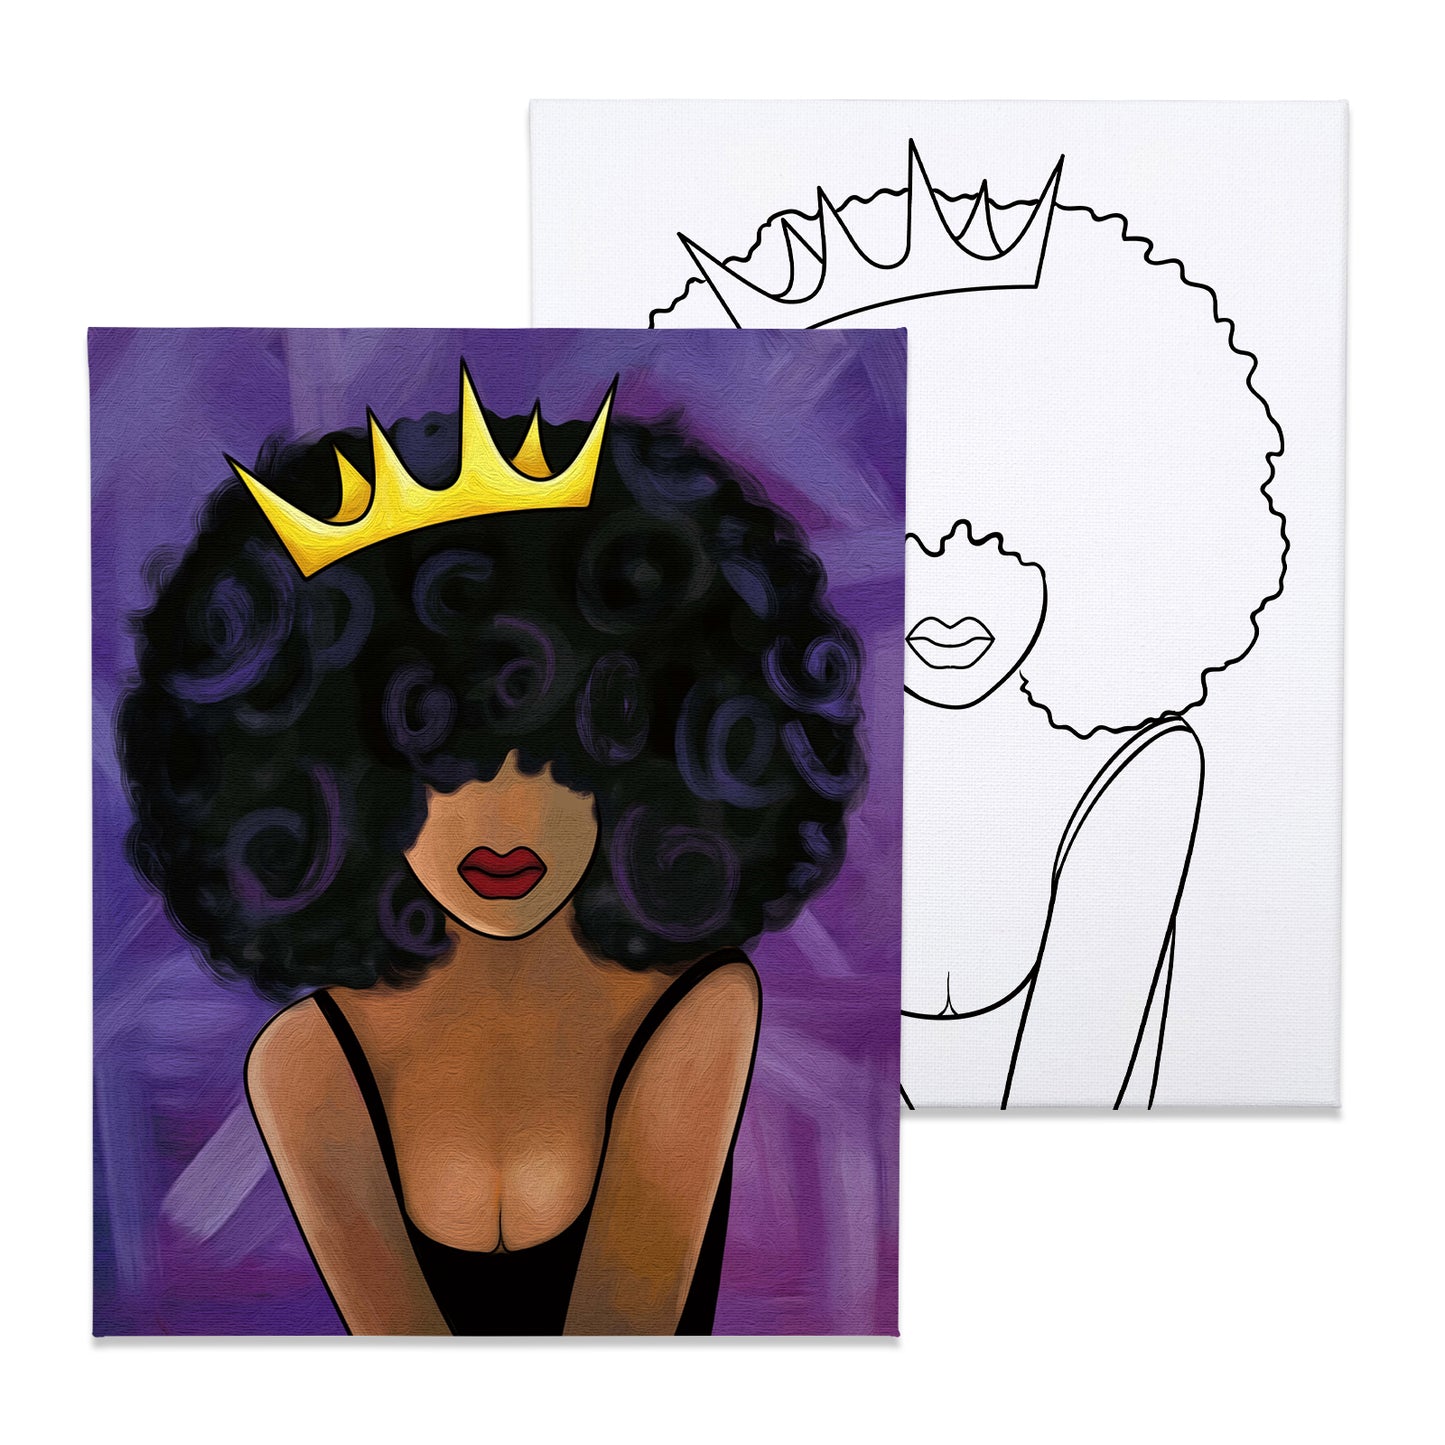 VOCHIC Canvas Painting Kit Pre Drawn Canvas for Painting for Adults Party  Party Kits Paint and Sip Party Supplies 8x10 Canvas to Paint Afro King